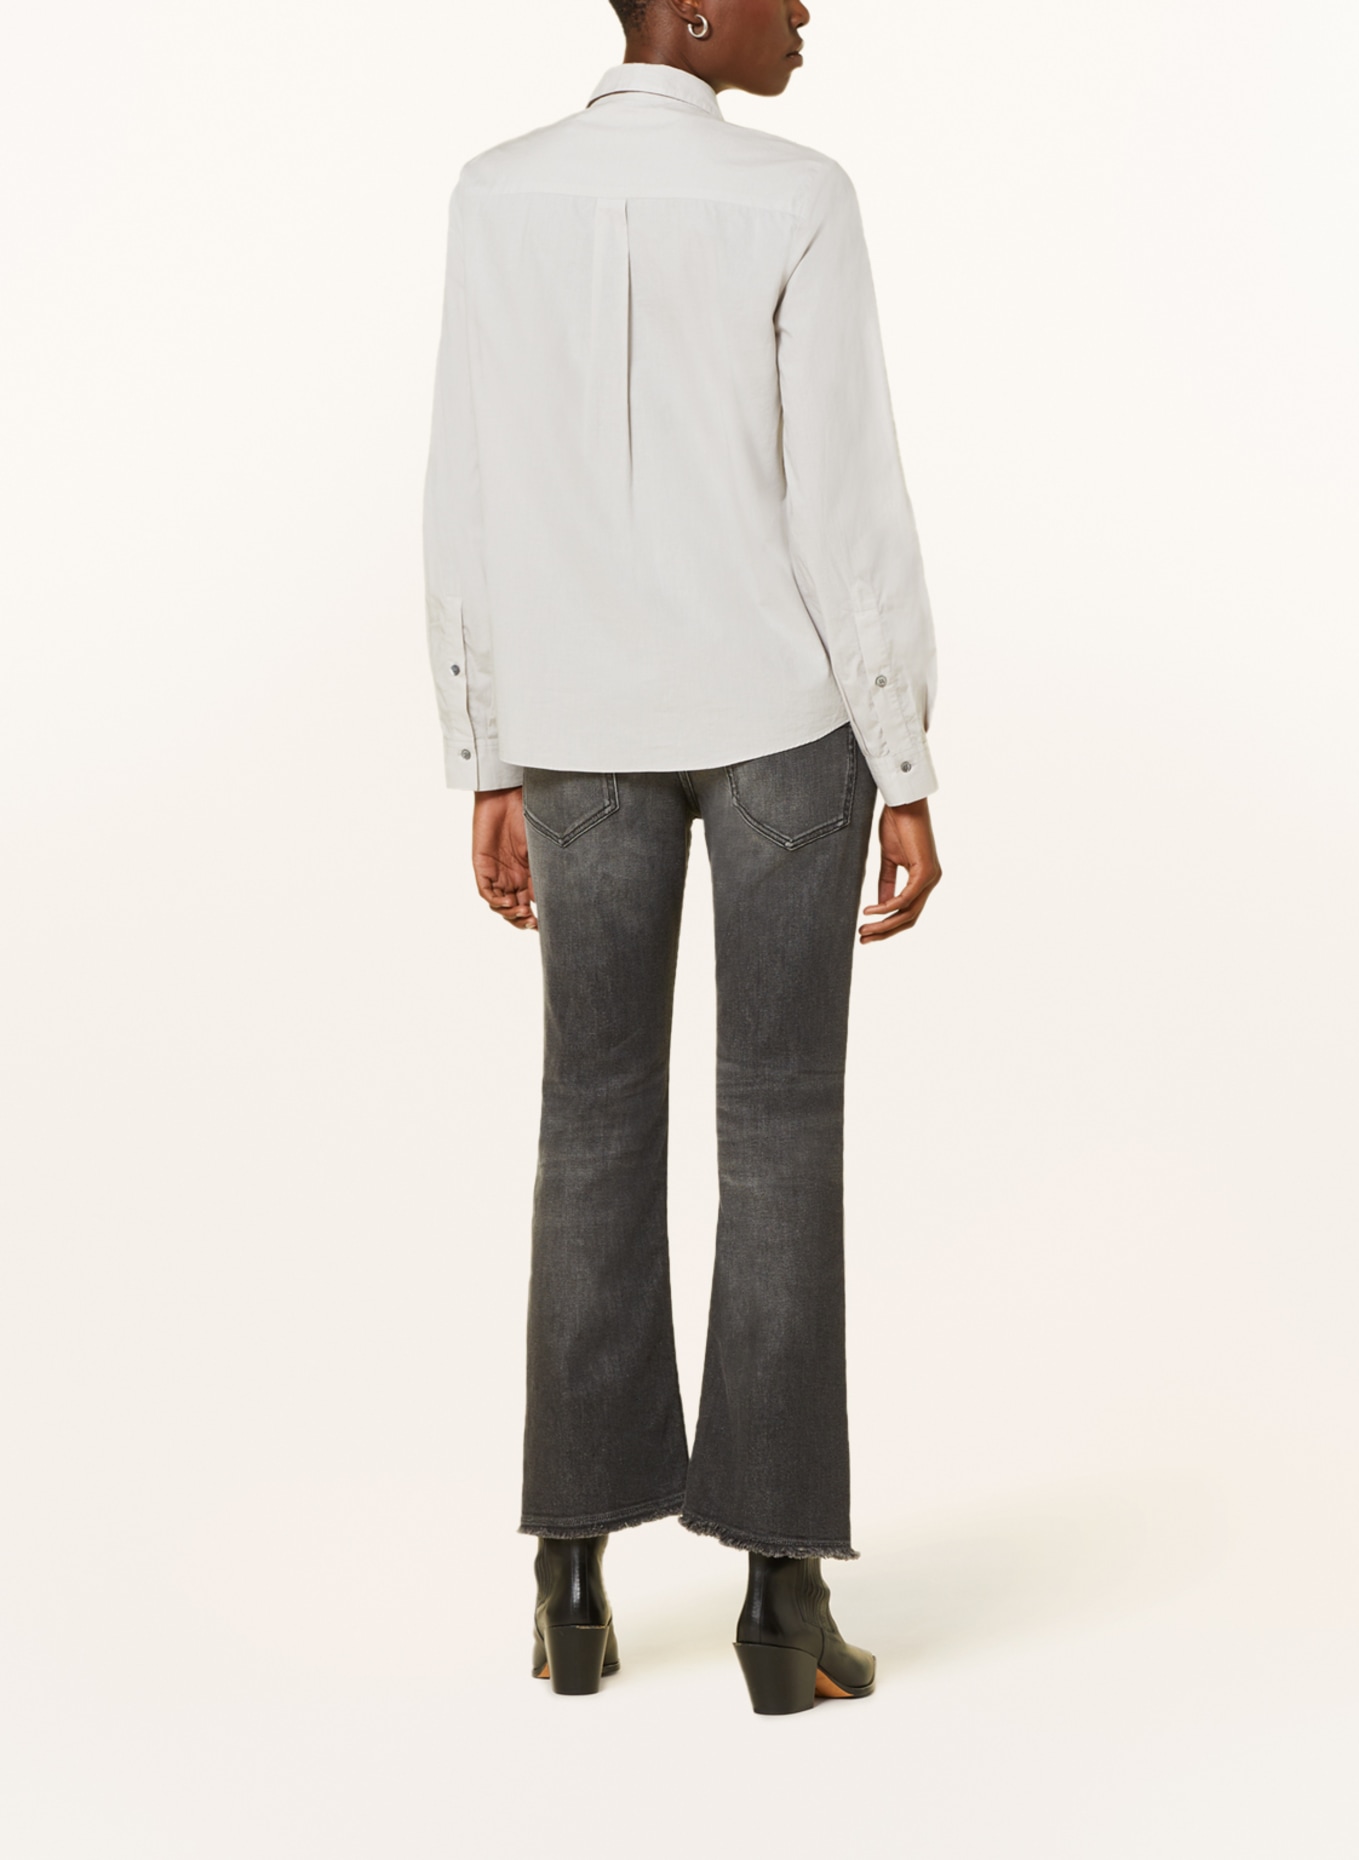 DOROTHEE SCHUMACHER Shirt blouse with decorative gems, Color: LIGHT GRAY (Image 3)